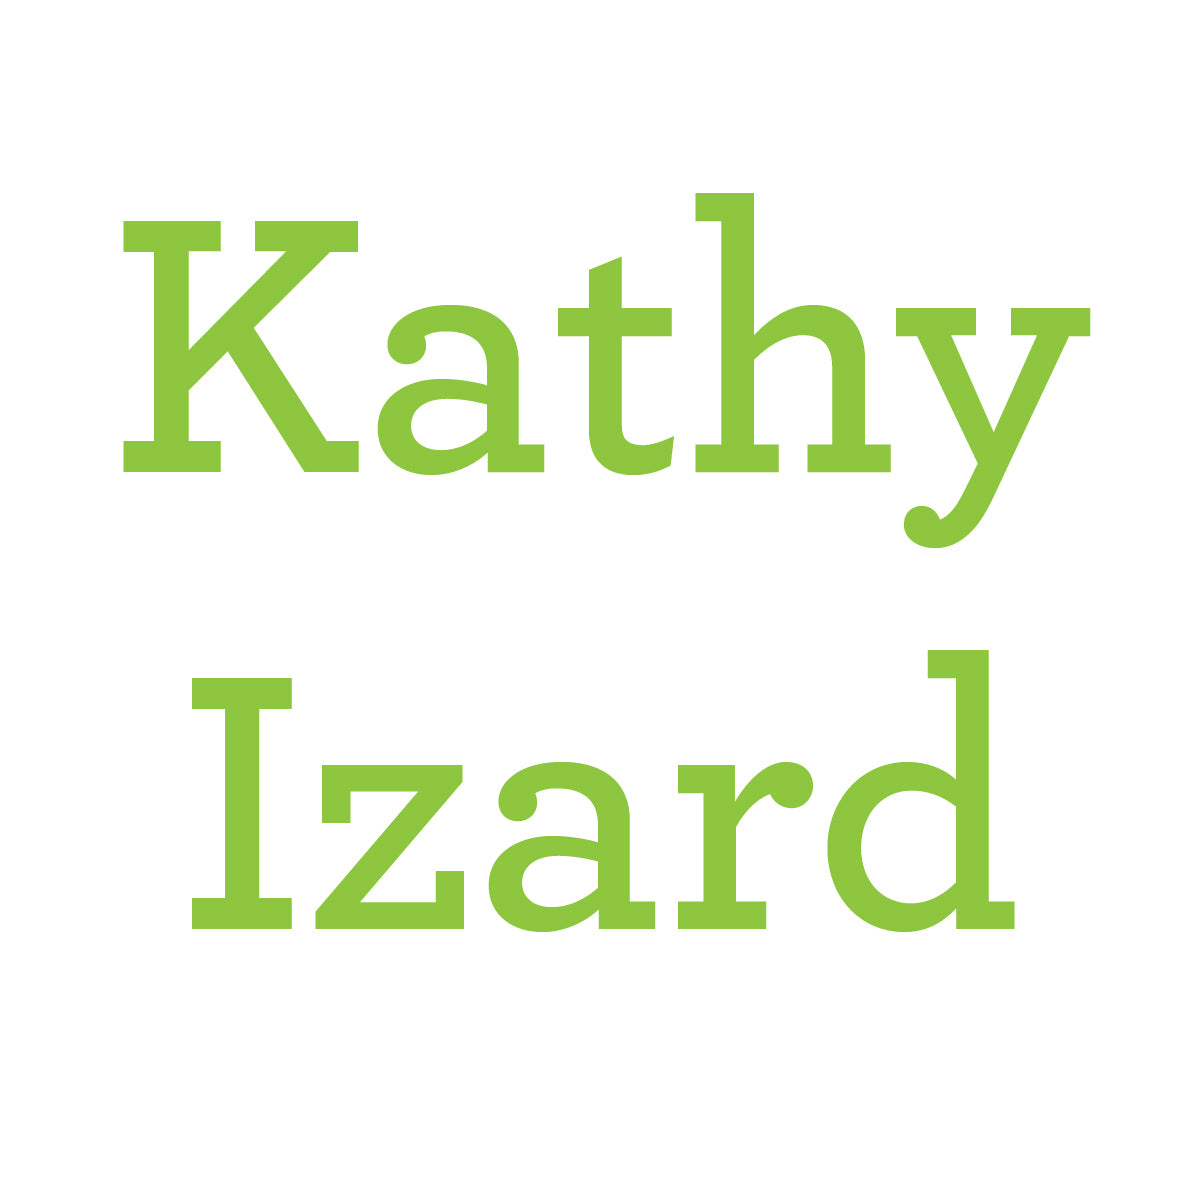 Kathy Izard Book Signing Event - Ticket (Includes 2 Books)